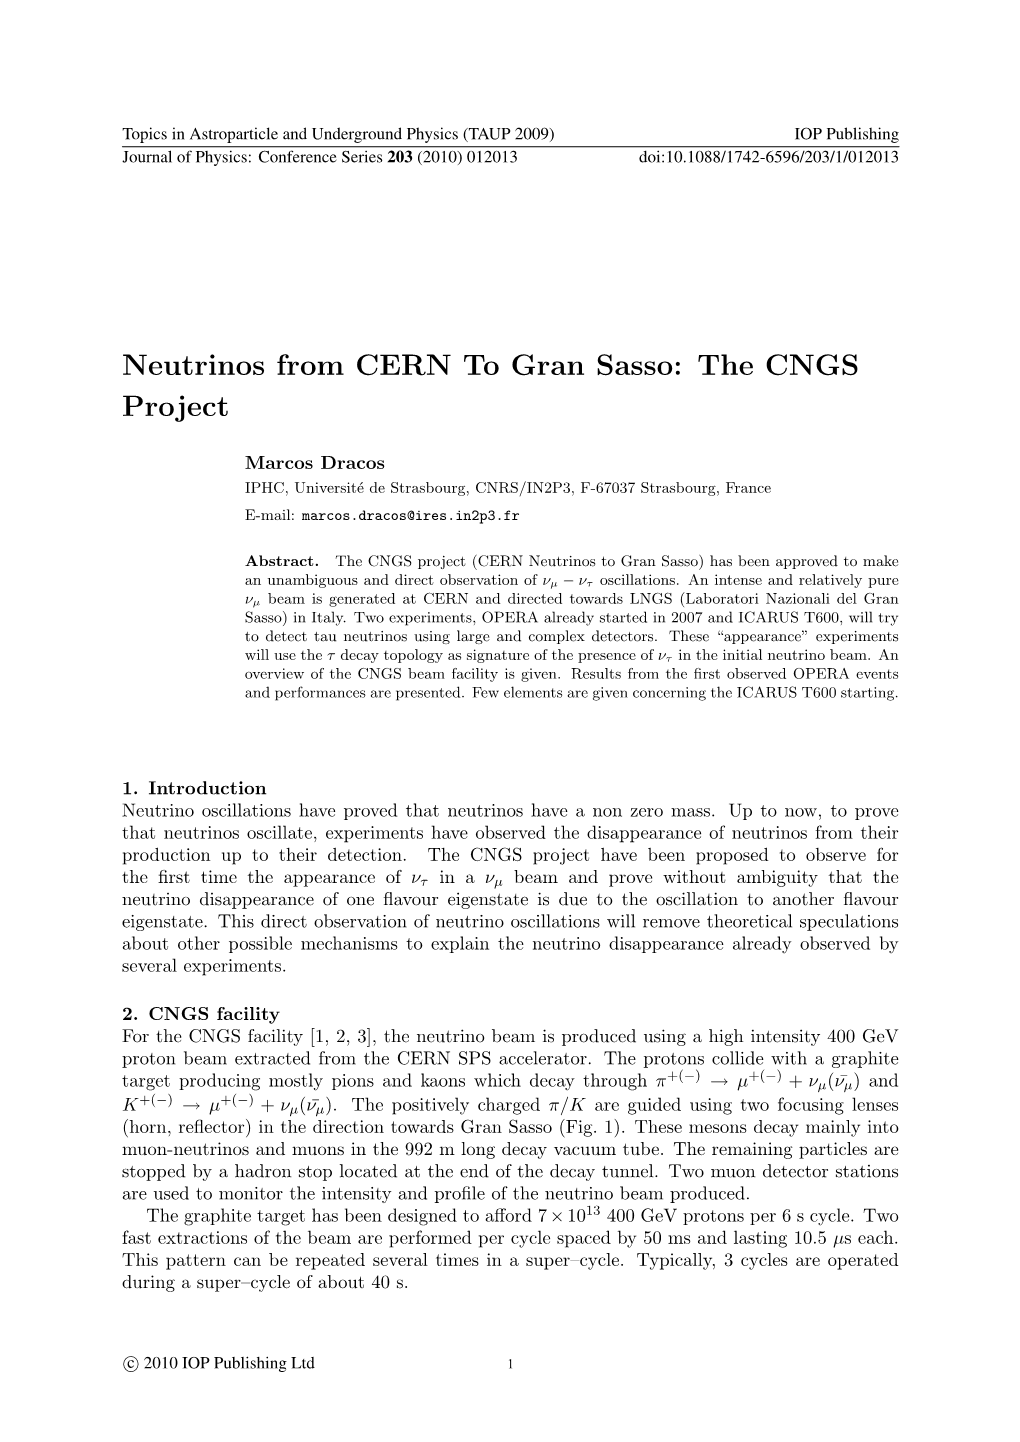 Neutrinos from CERN to Gran Sasso: the CNGS Project